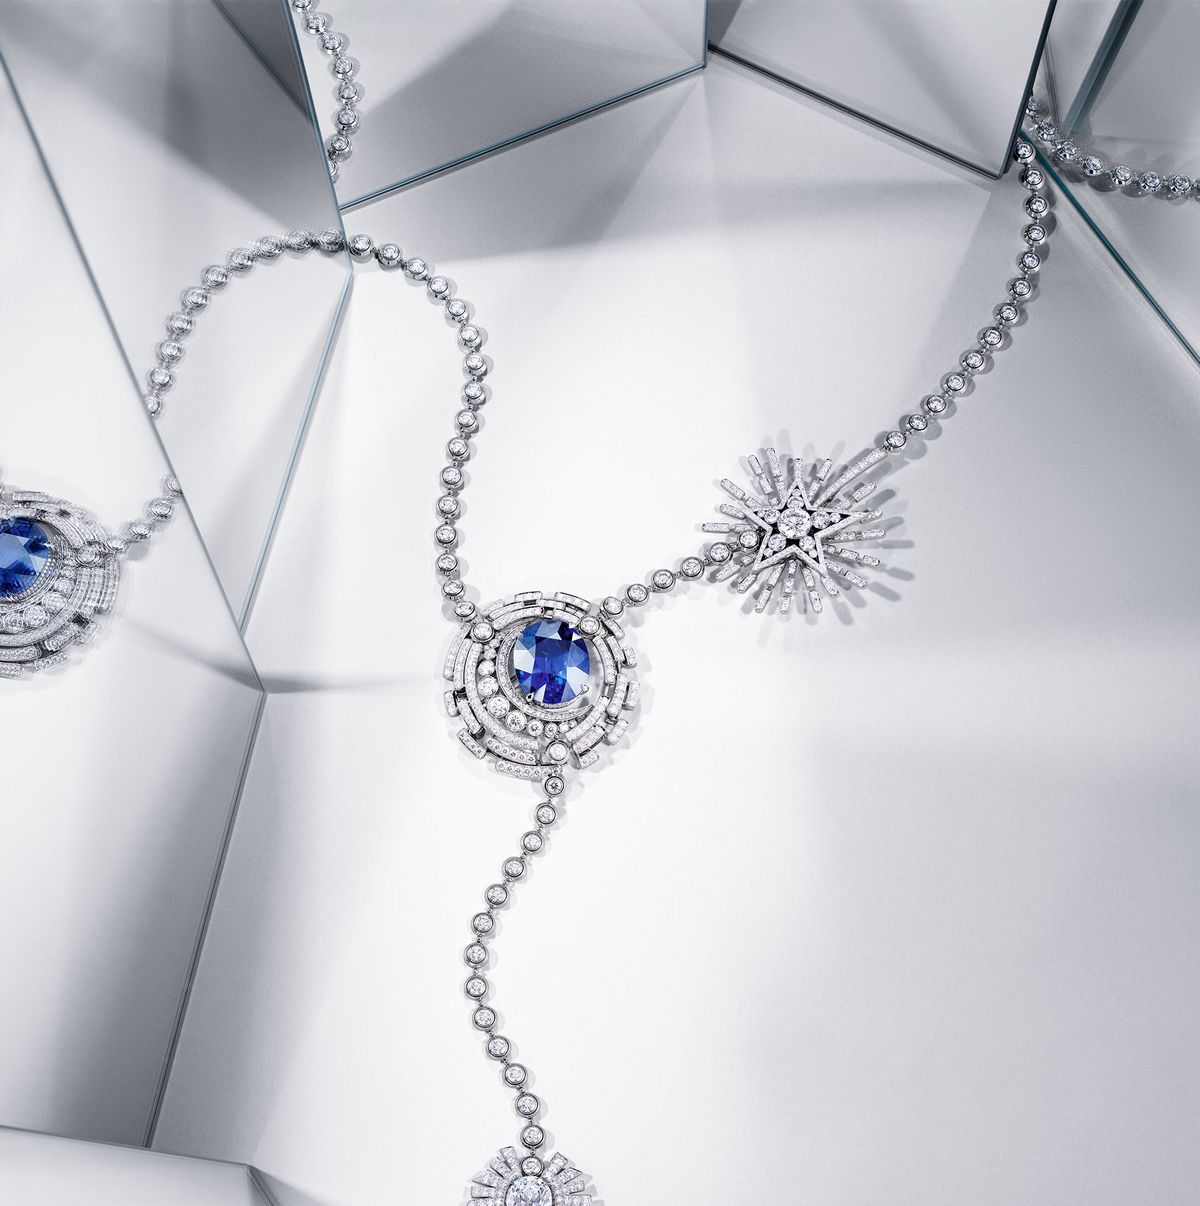 Chanel's Latest High Jewelry Is an Ode to the Legendary No. 5 Perfume -  Galerie